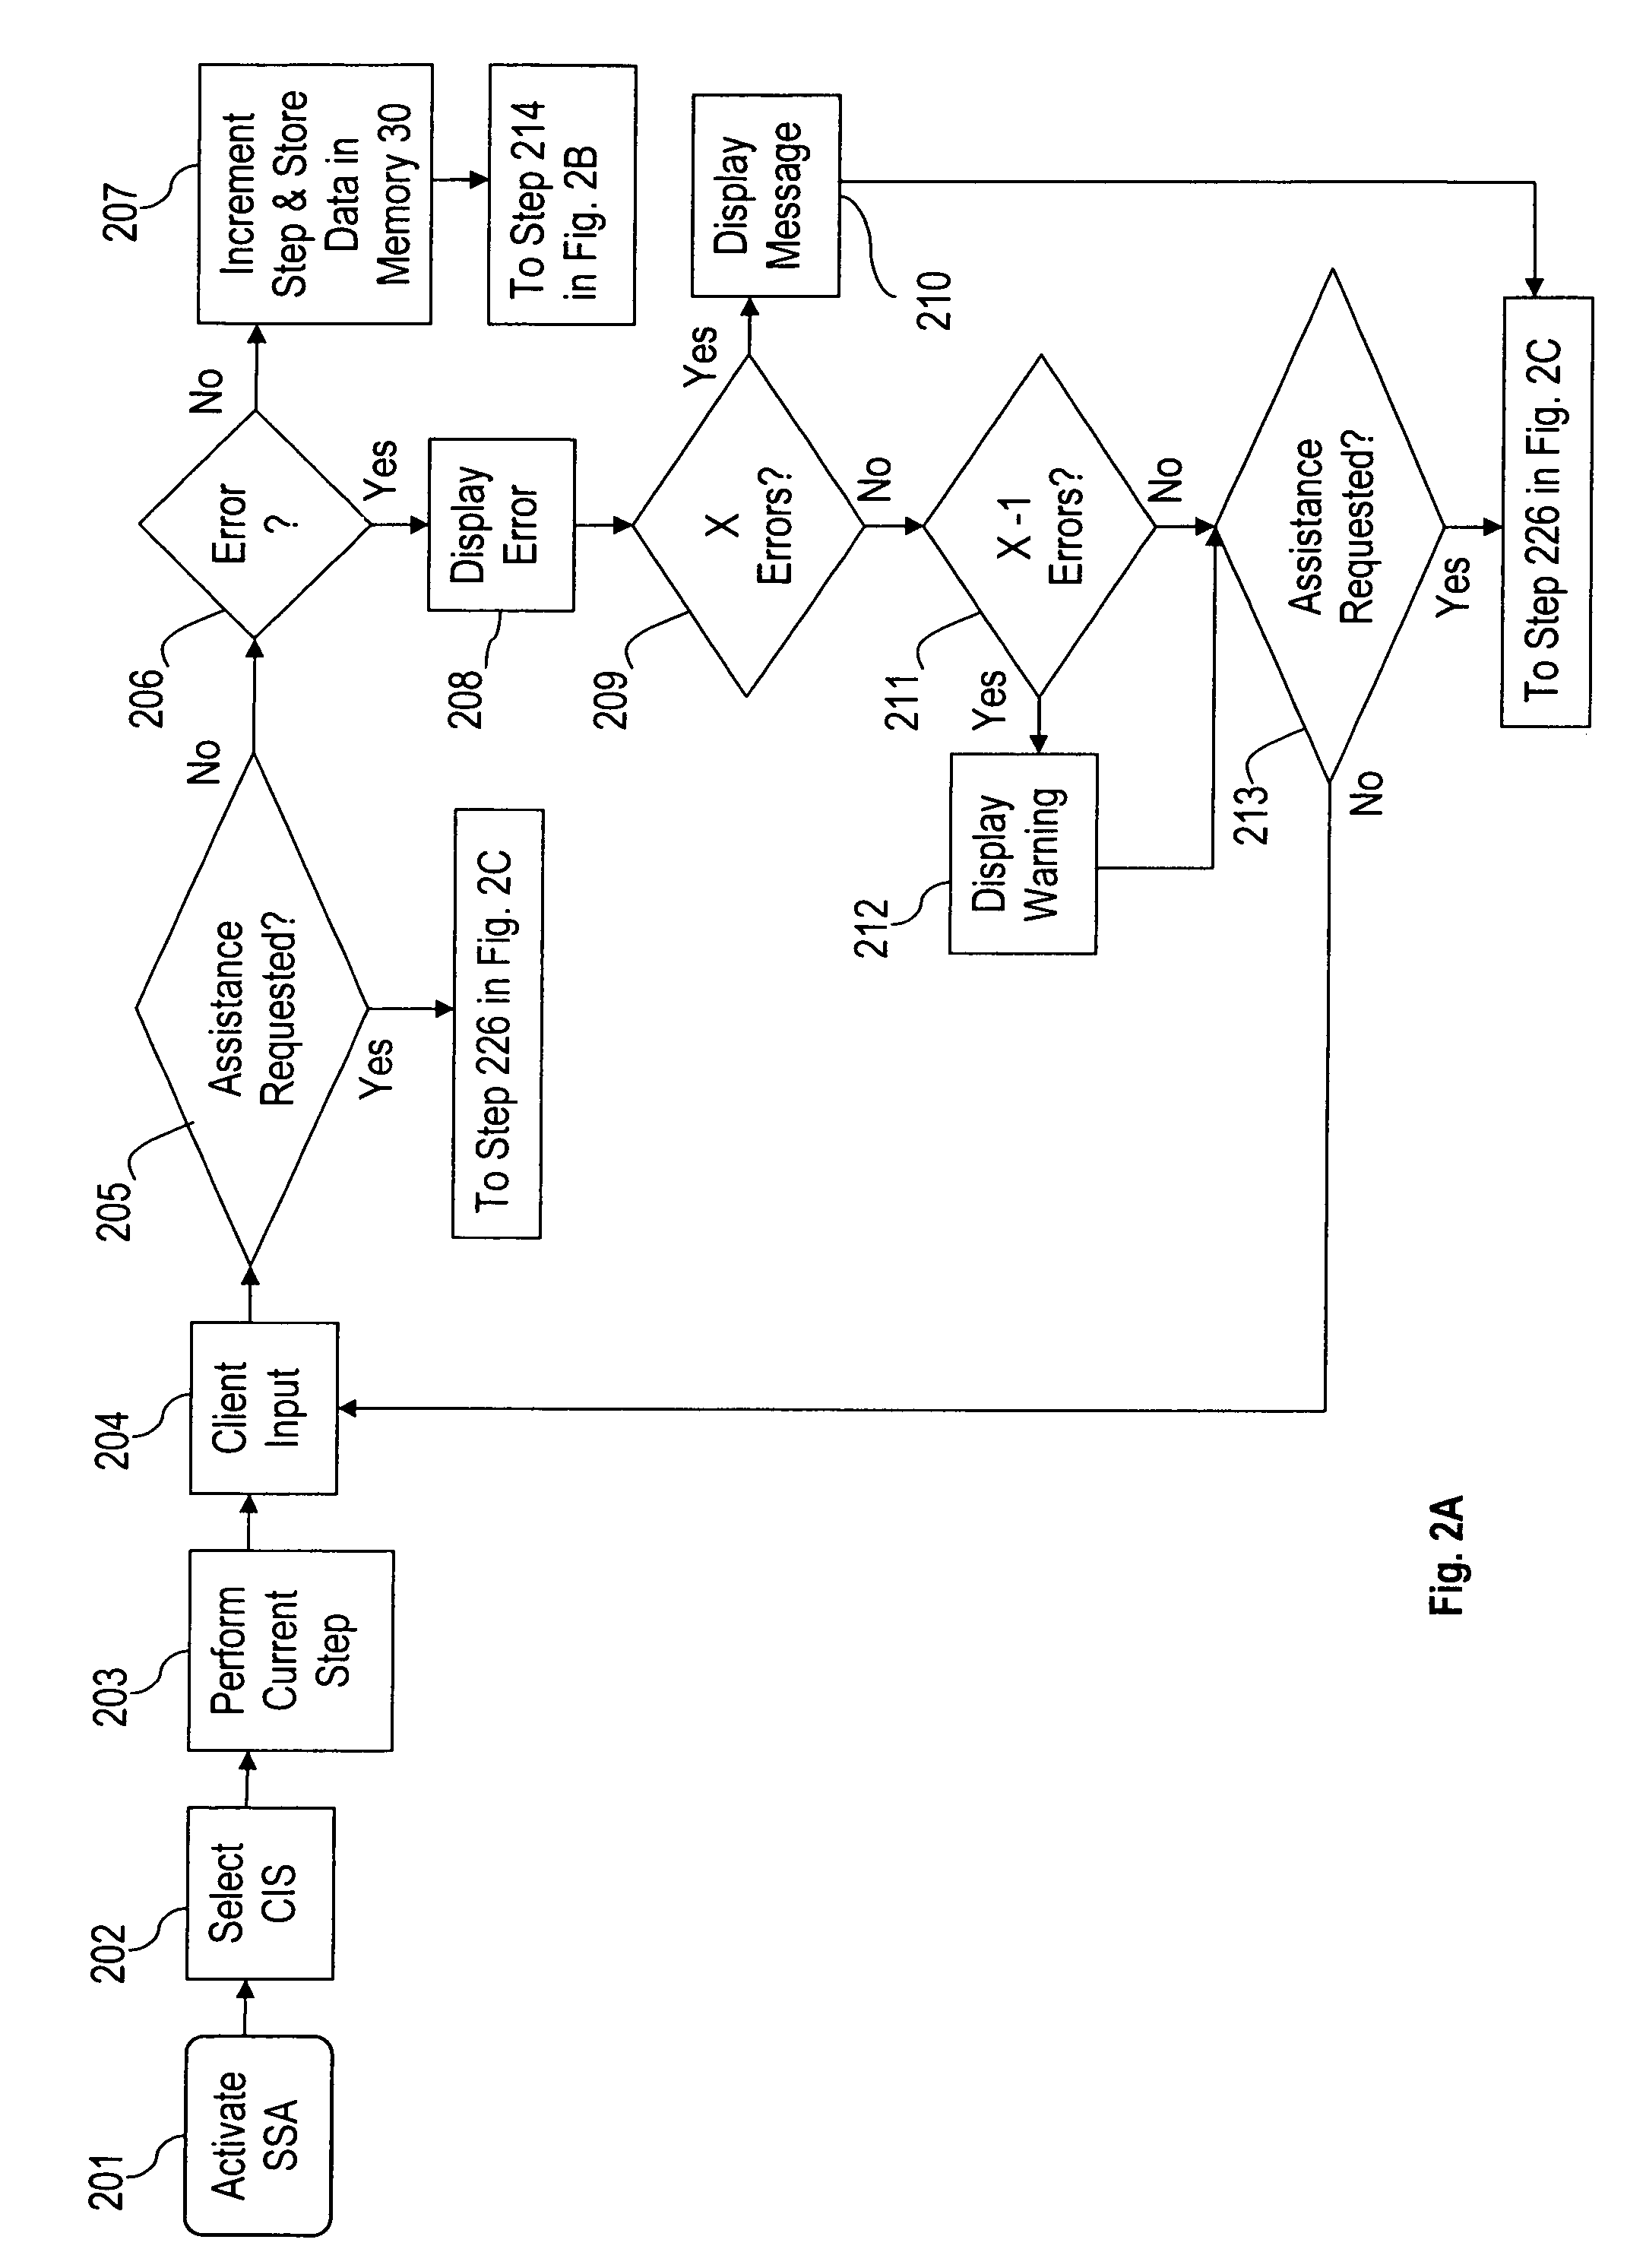 Systems and methods for enabling customer care assistance with self-service transactions